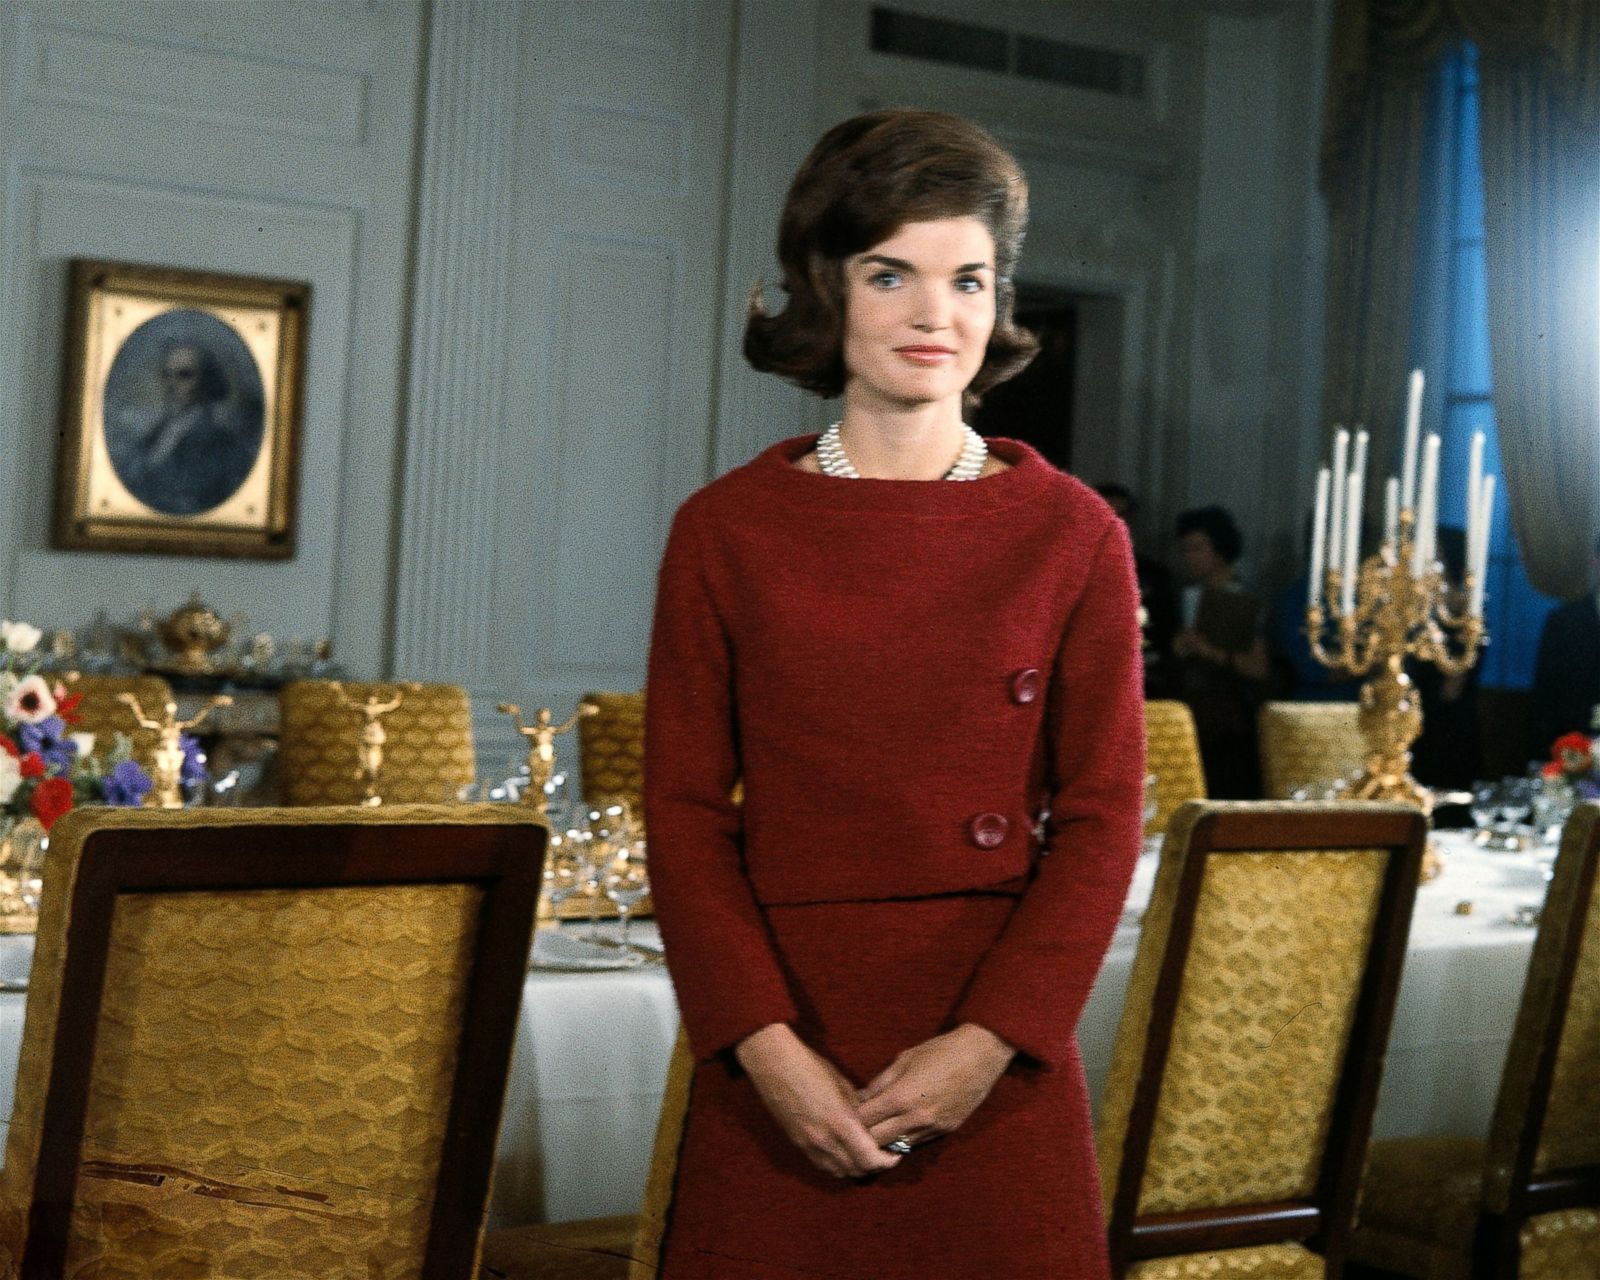 How to Recreate the Best Jackie Kennedy Fashion Moments